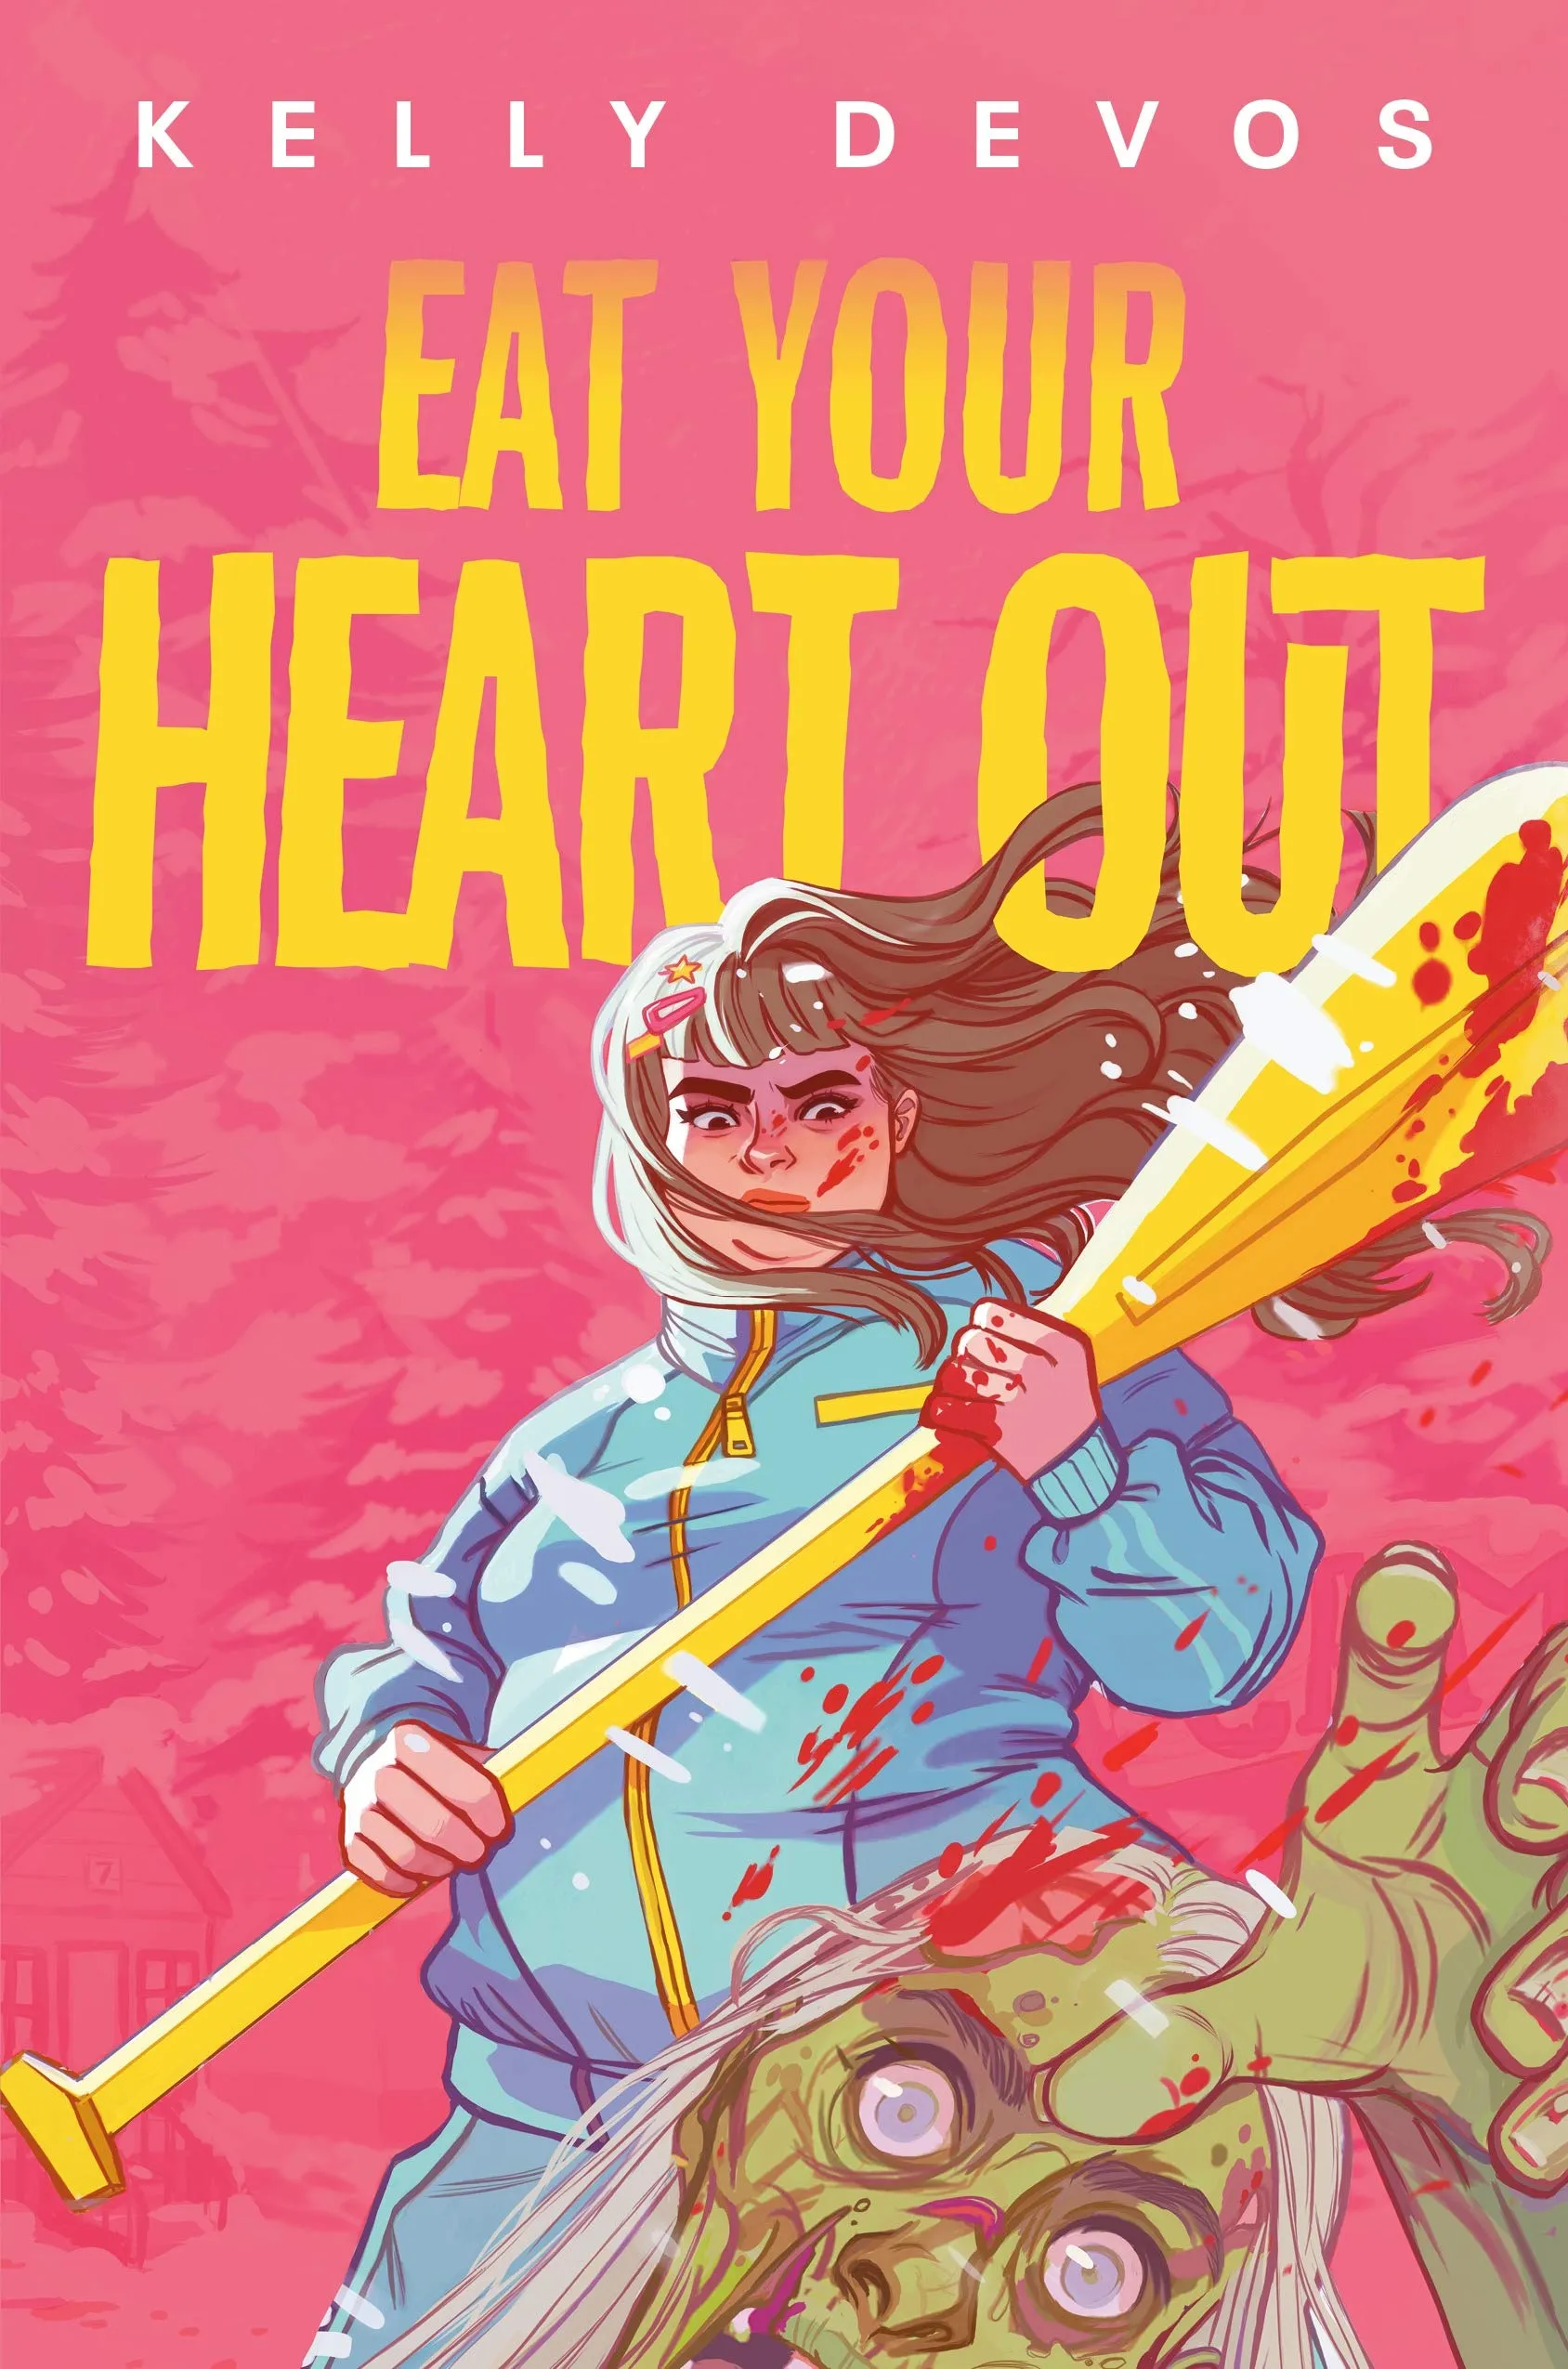 Eat Your Heart Out Cover